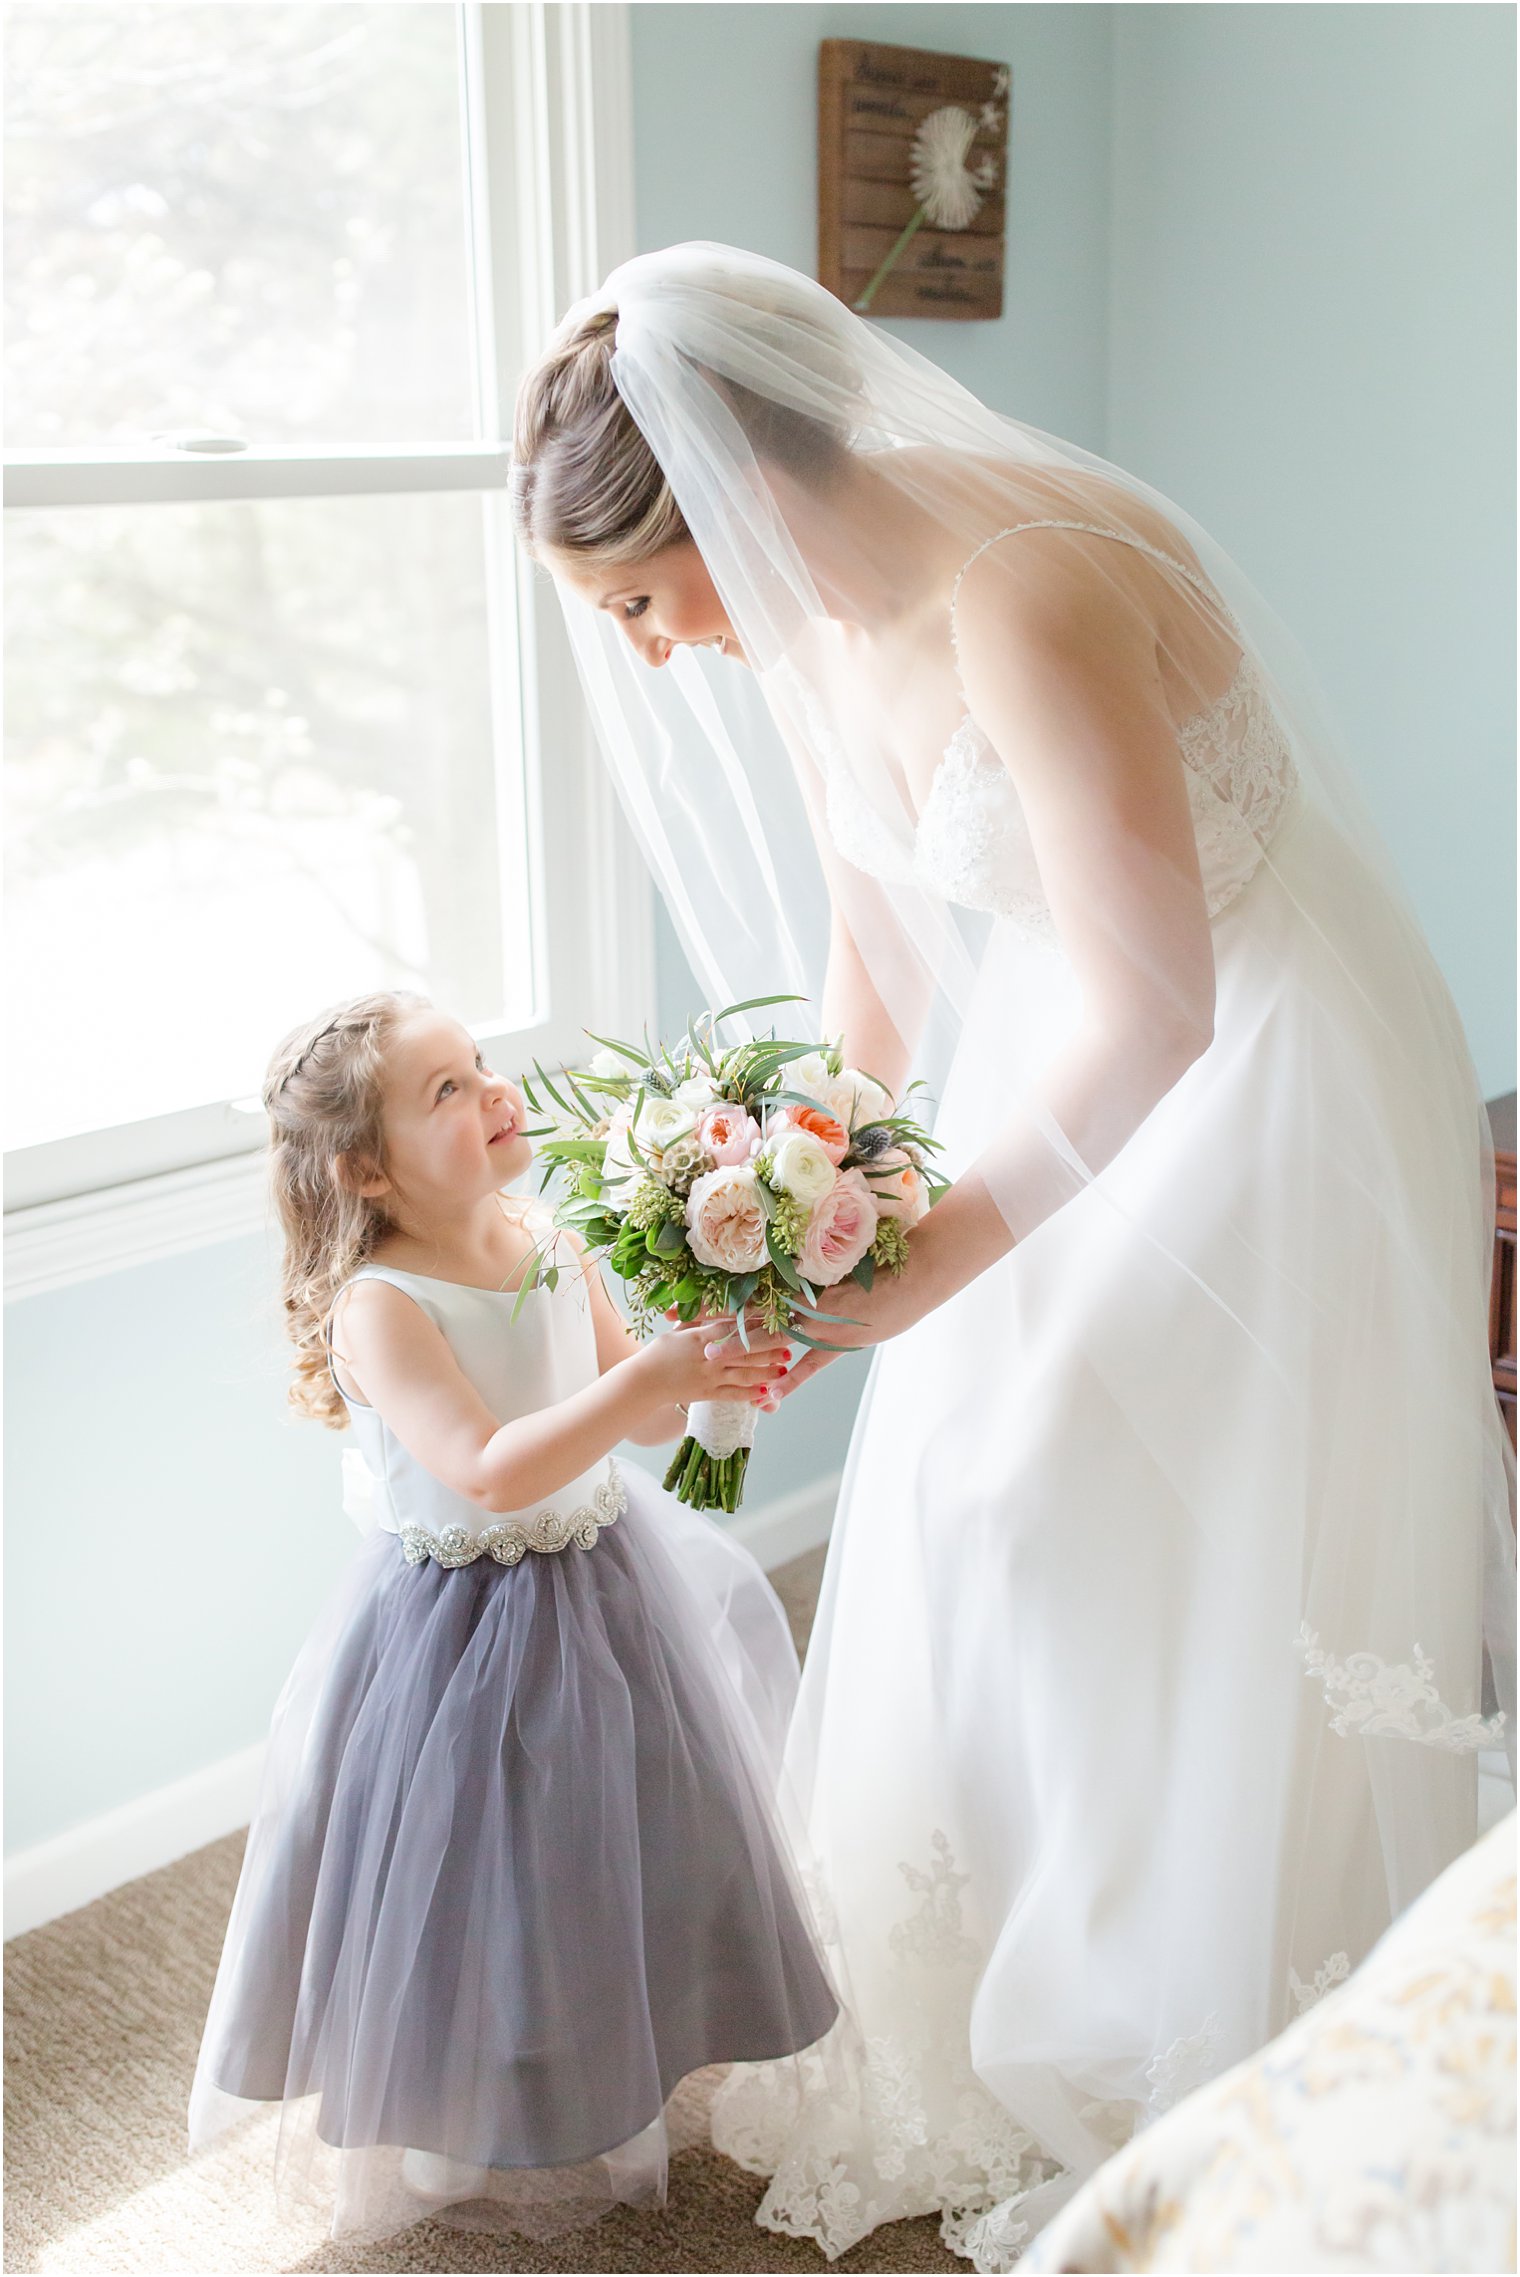 Bride and flower girl on wedding day